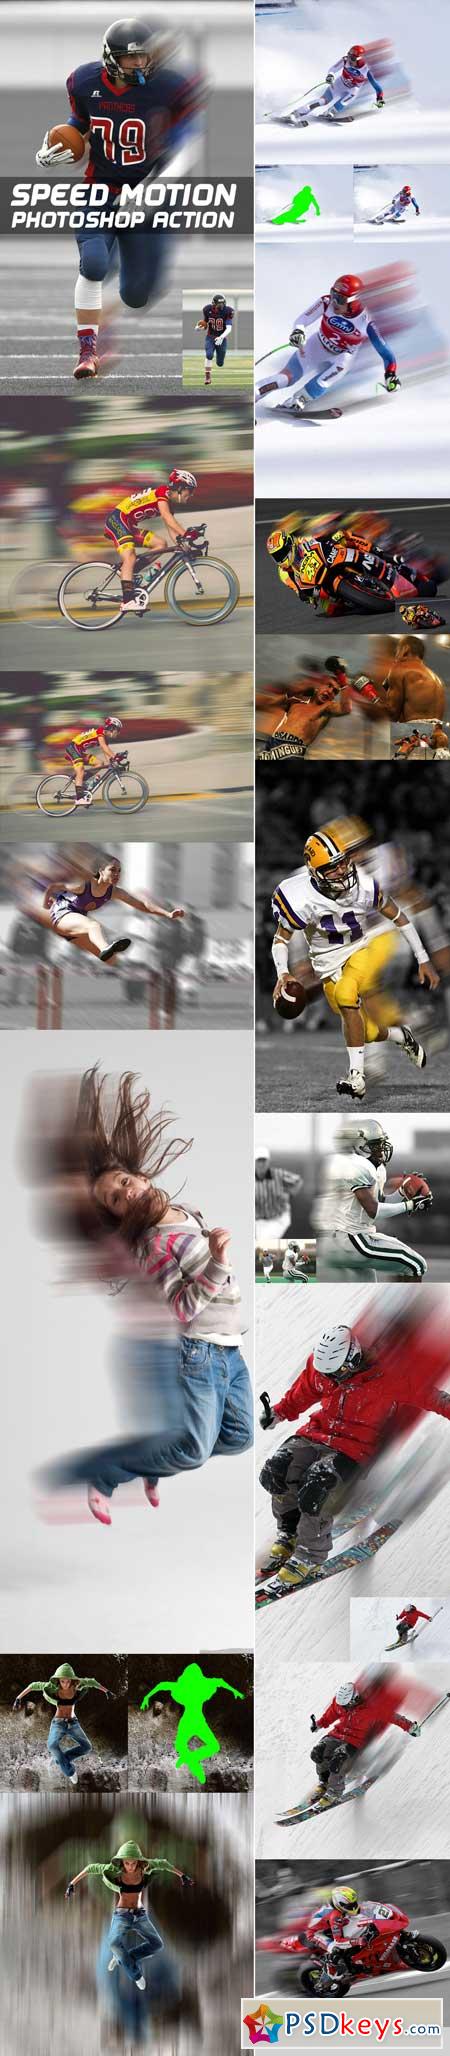 Speed Motion Photoshop Action 20158455